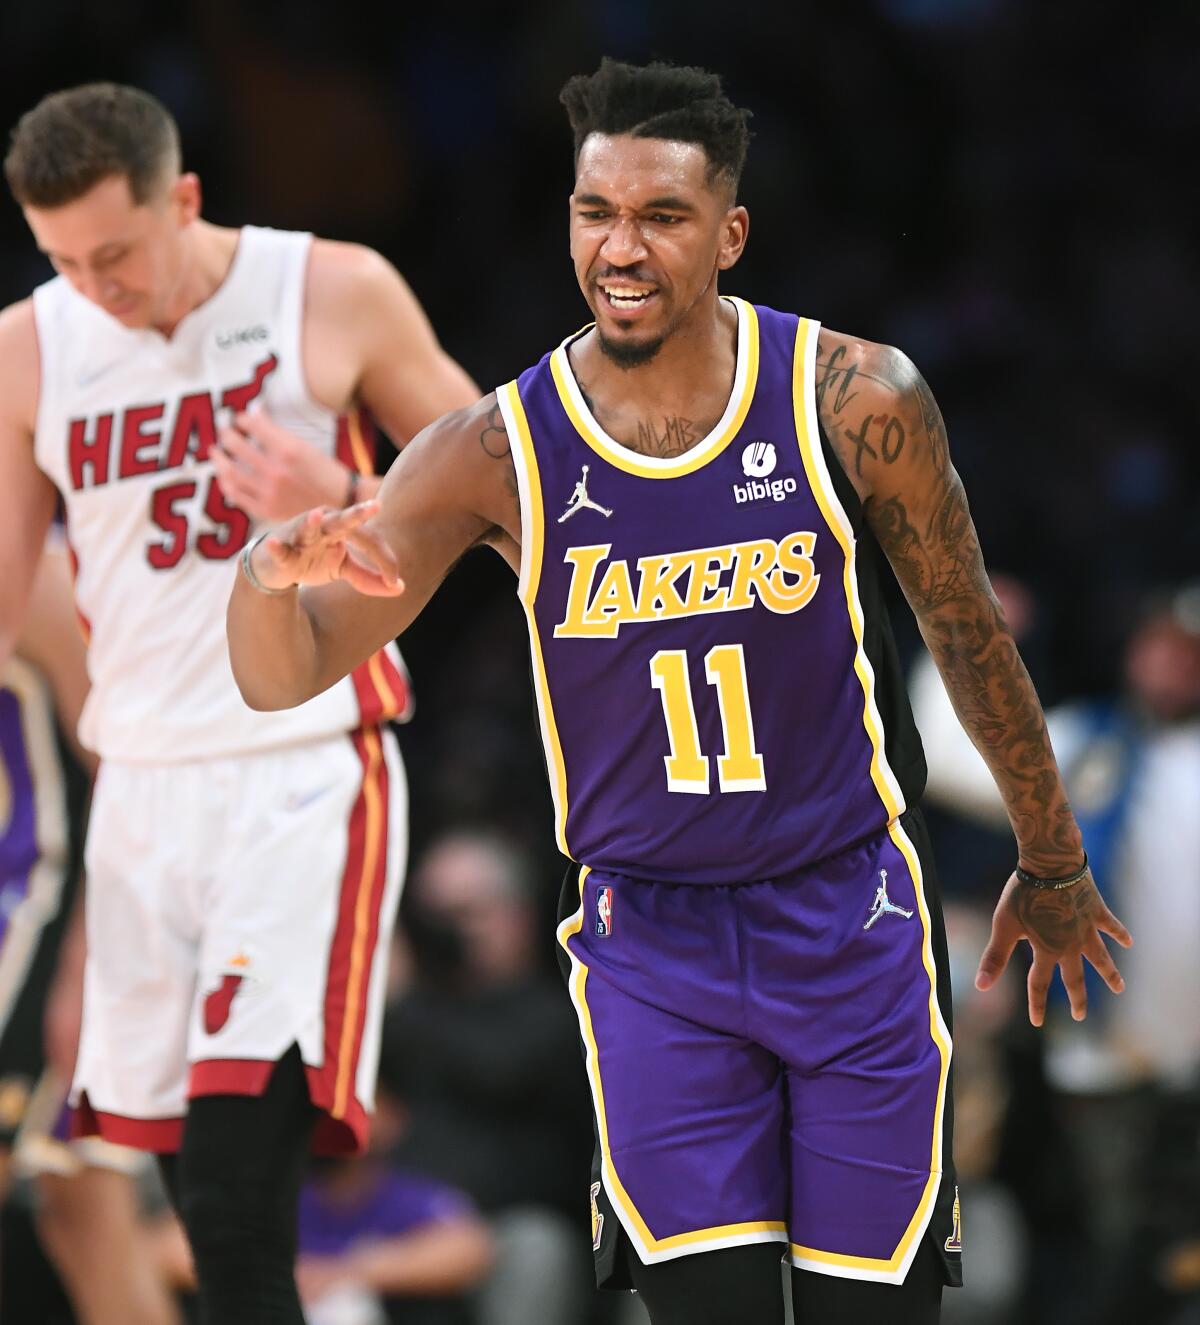 Laker Malik Monk celebrates after hitting a three-pointer against the Heat 